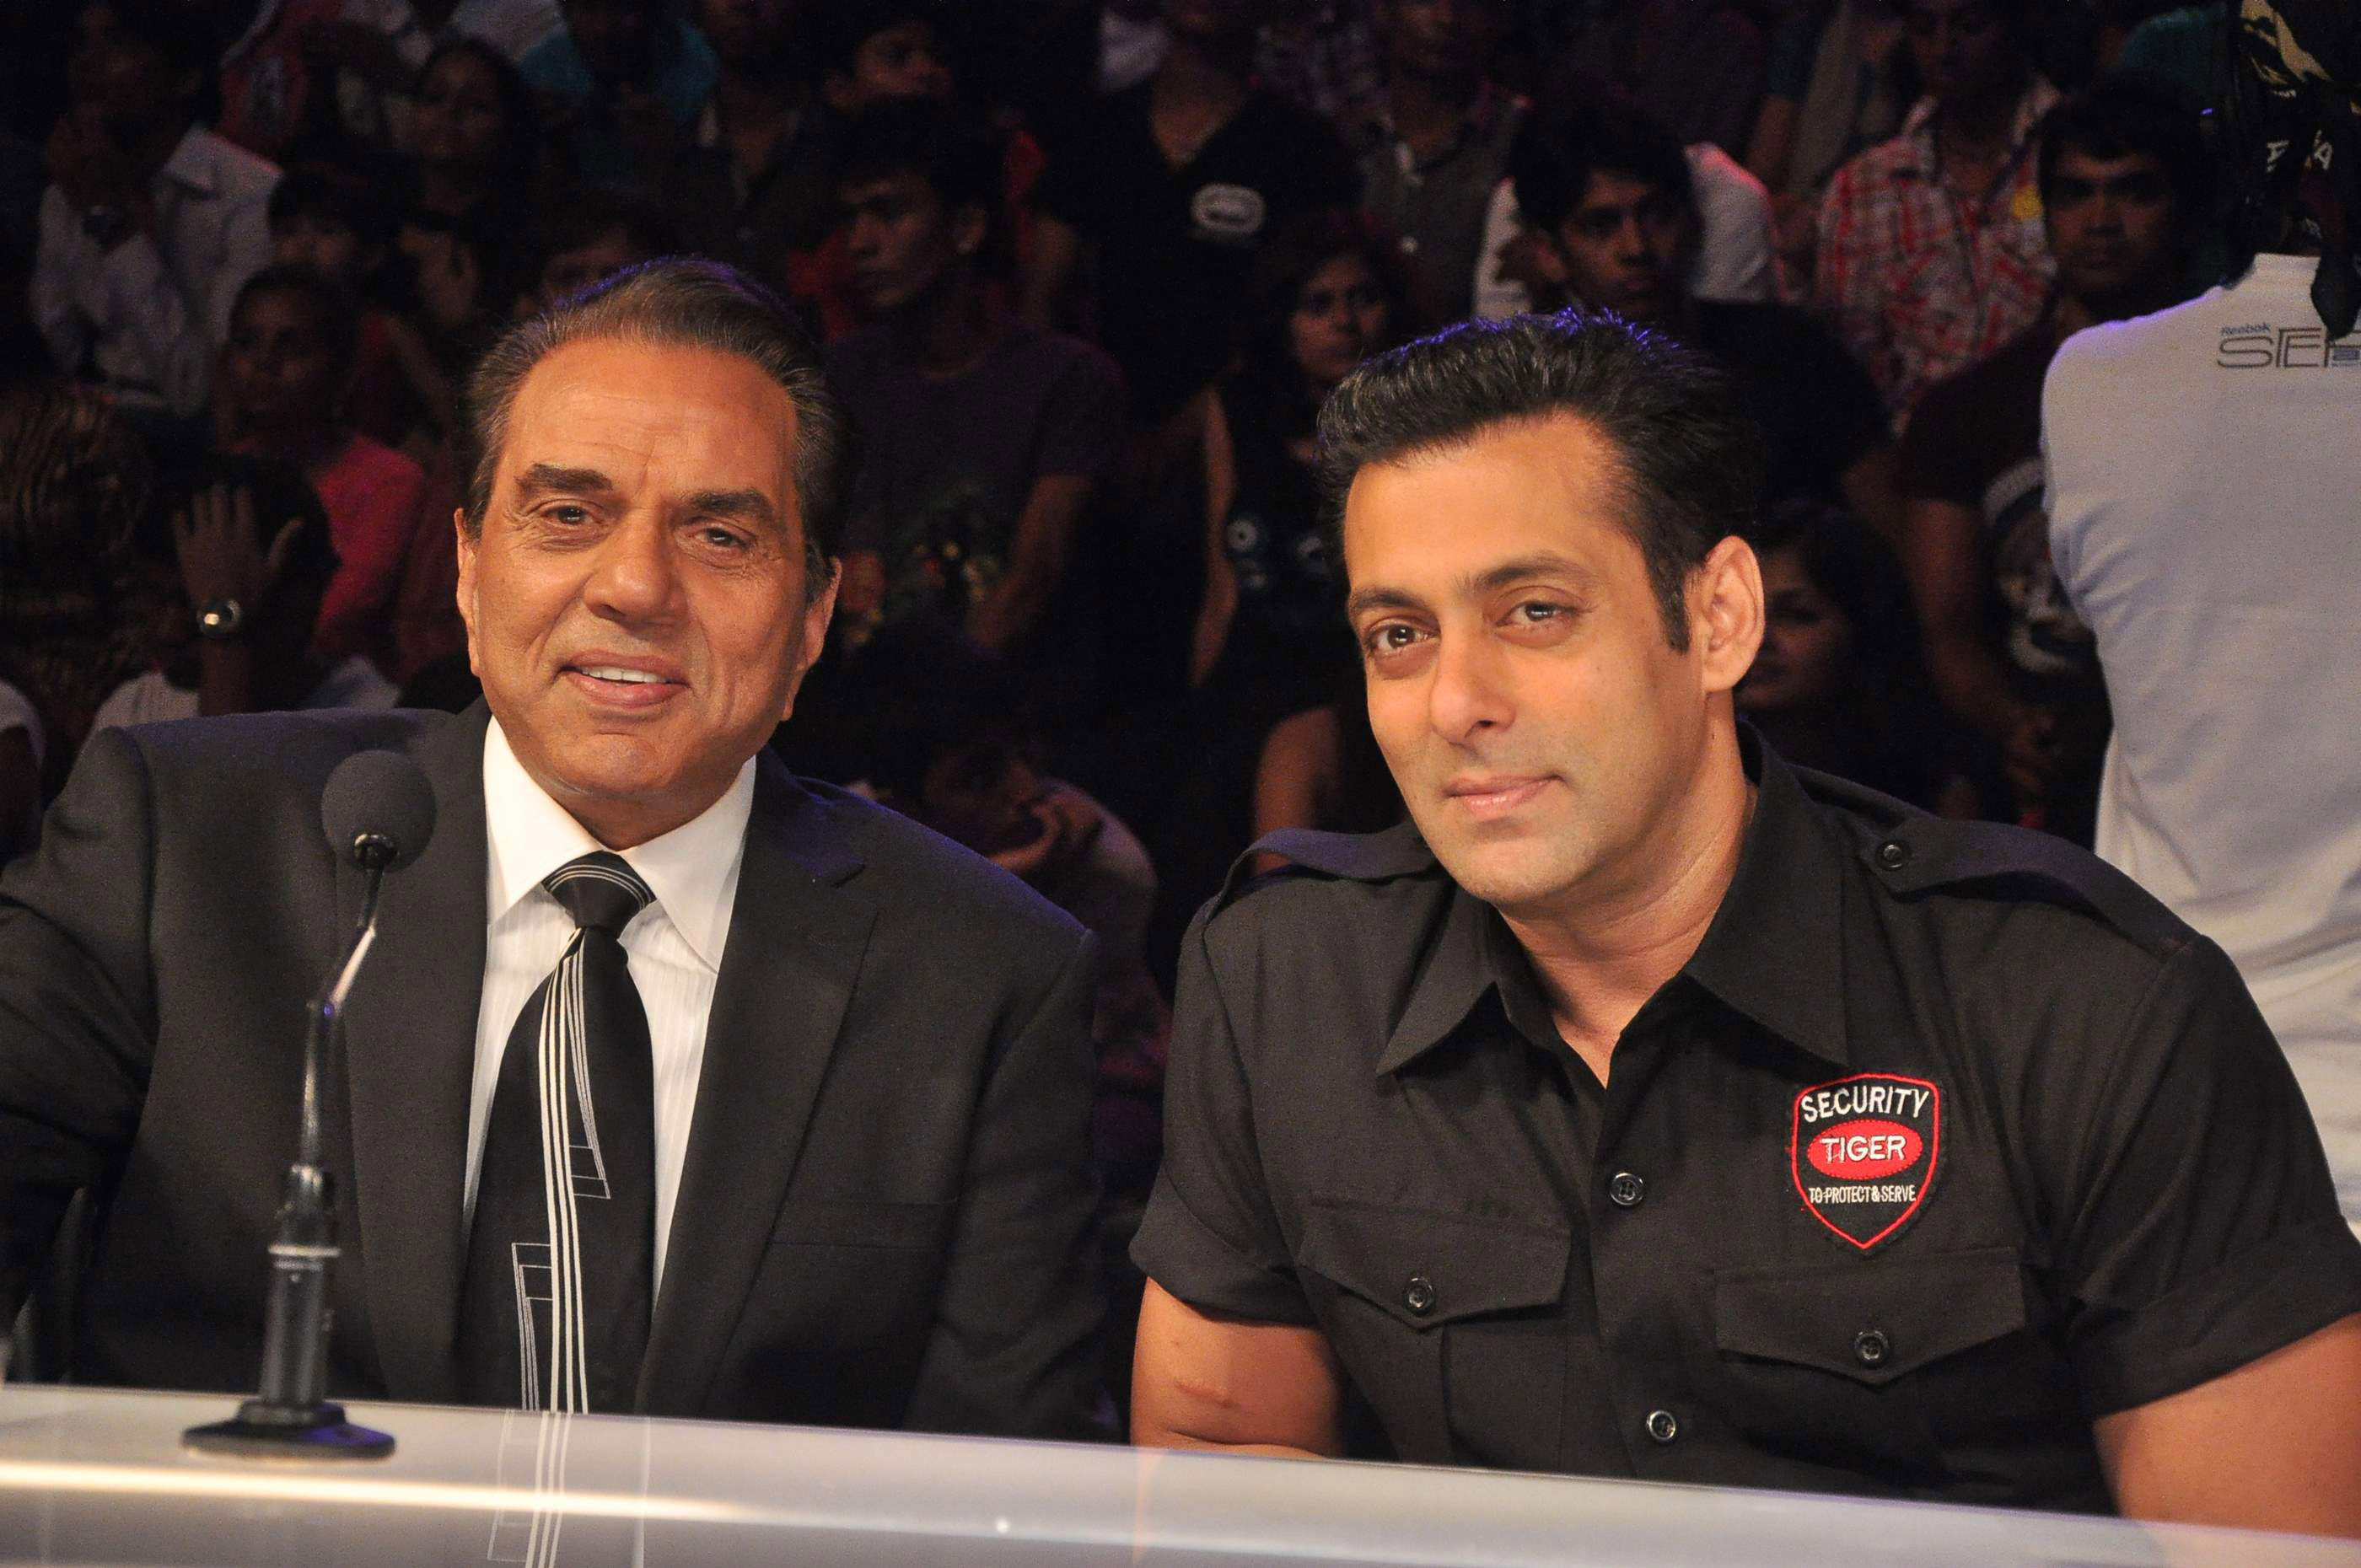 Dharmendra and Salman Khan promotes the movie 'Bodyguard' pictures | Picture 63772